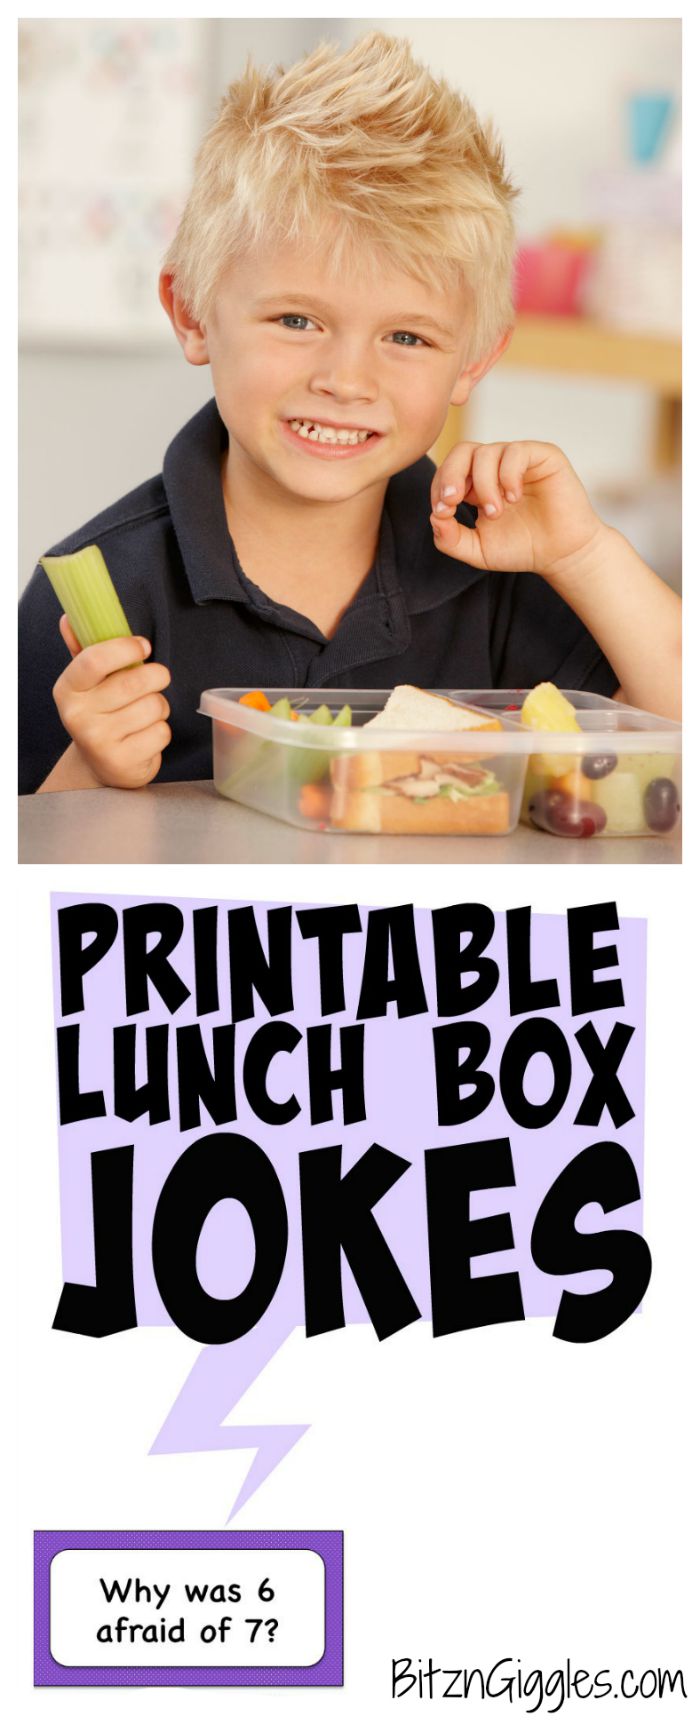 Printable Lunch Box Jokes - 10 printable joke cards perfect for putting a smile on your child's face at school! Let them know you're thinking of them!